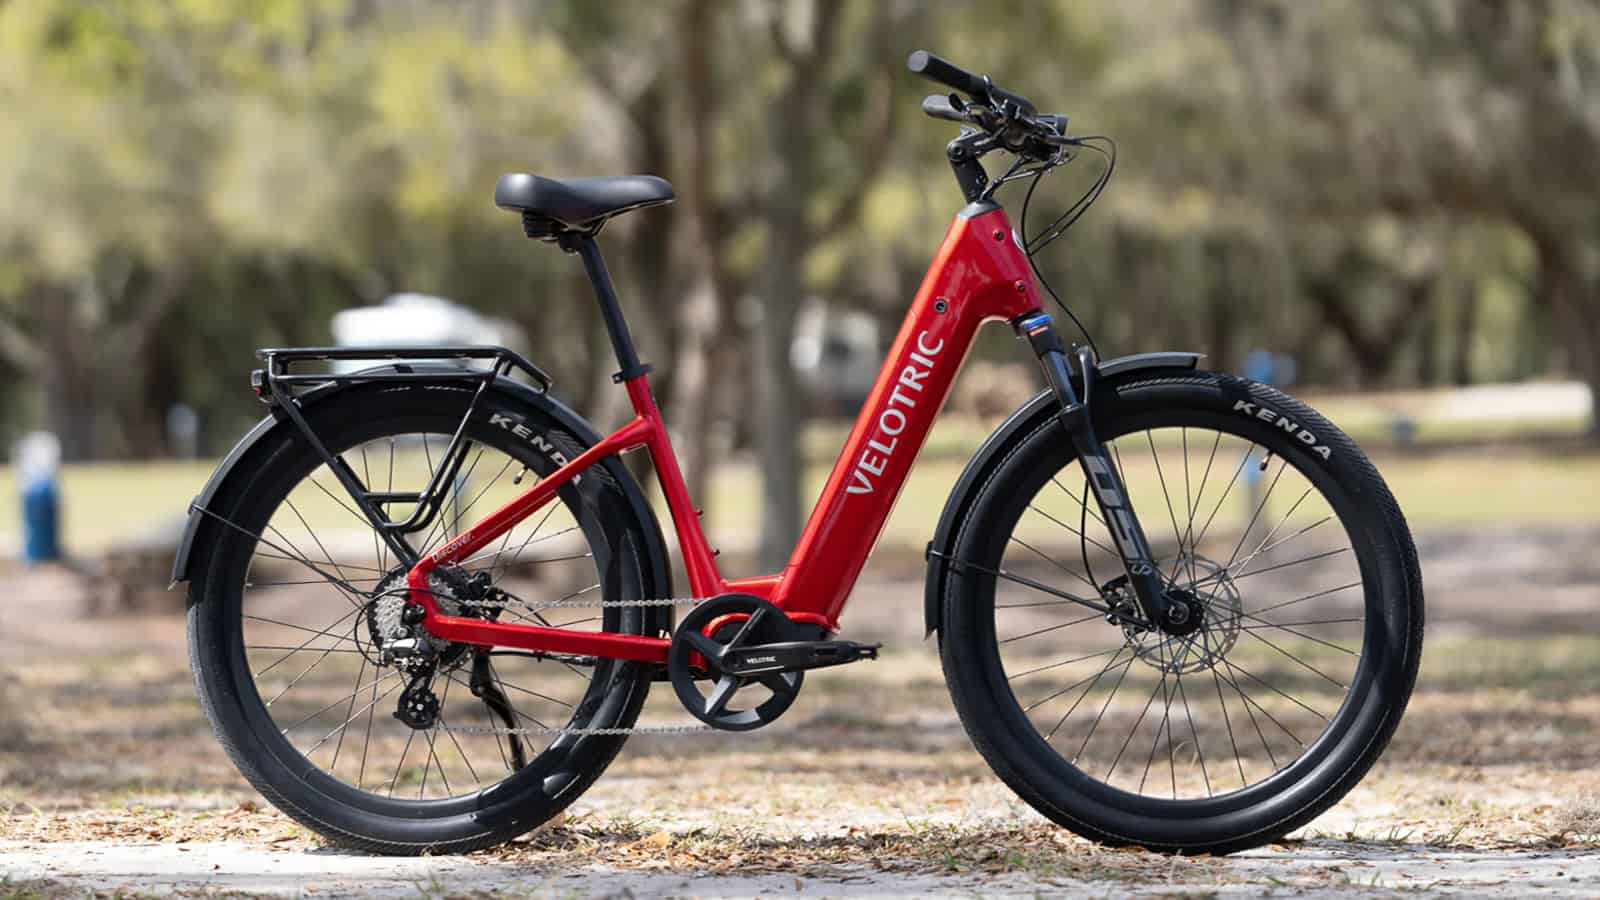 Velotric Discover 2 electric bike in red